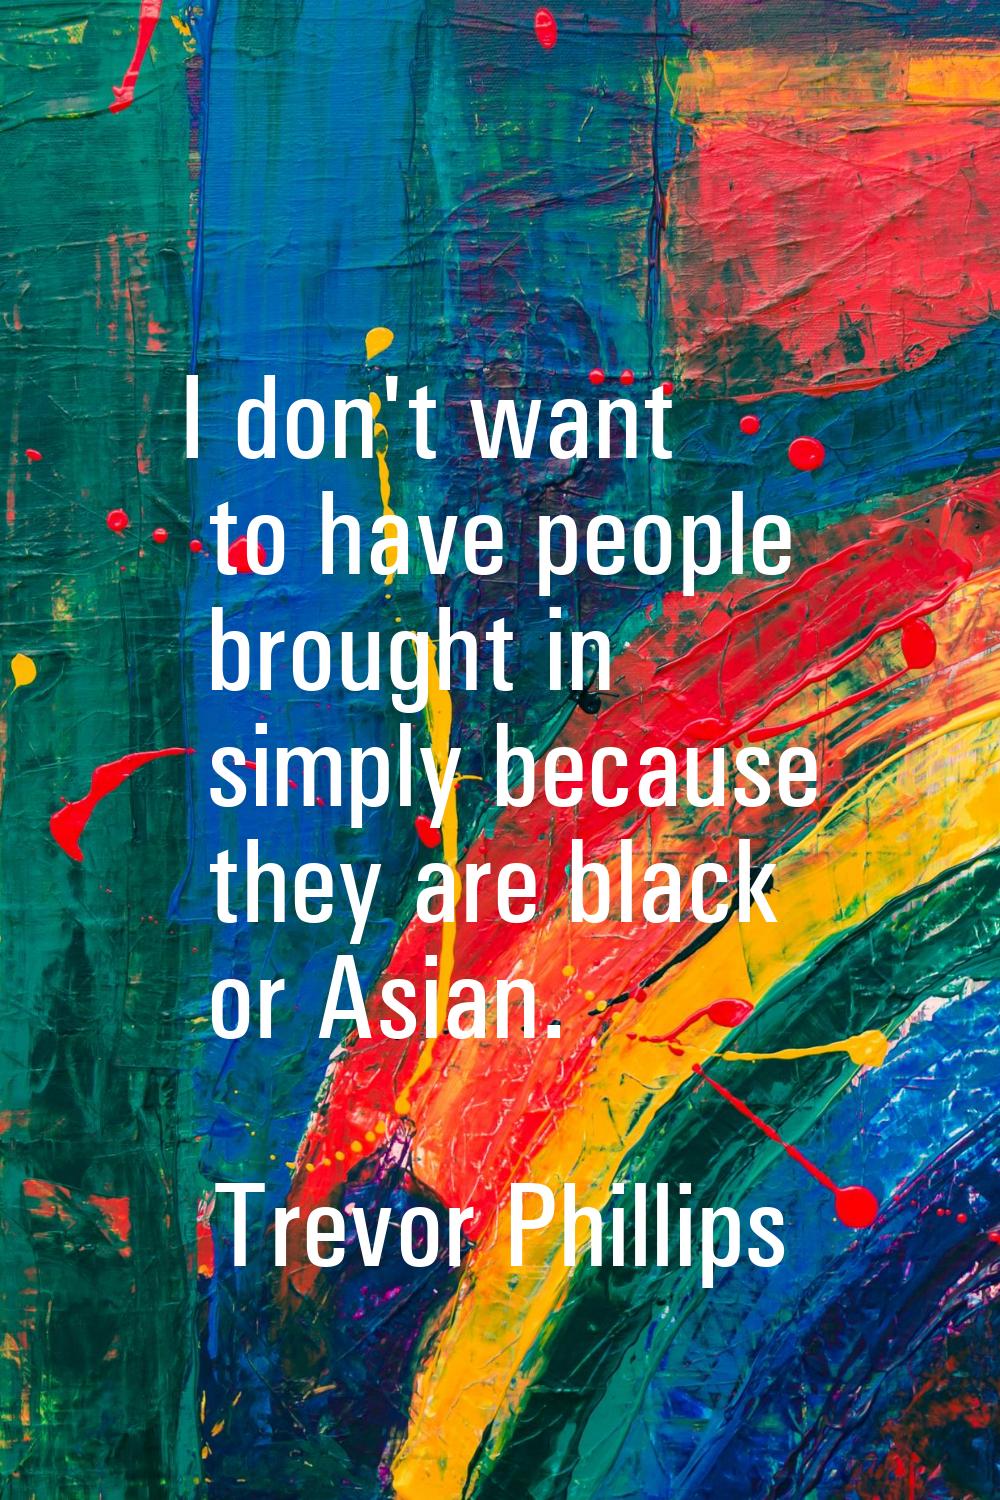 I don't want to have people brought in simply because they are black or Asian.